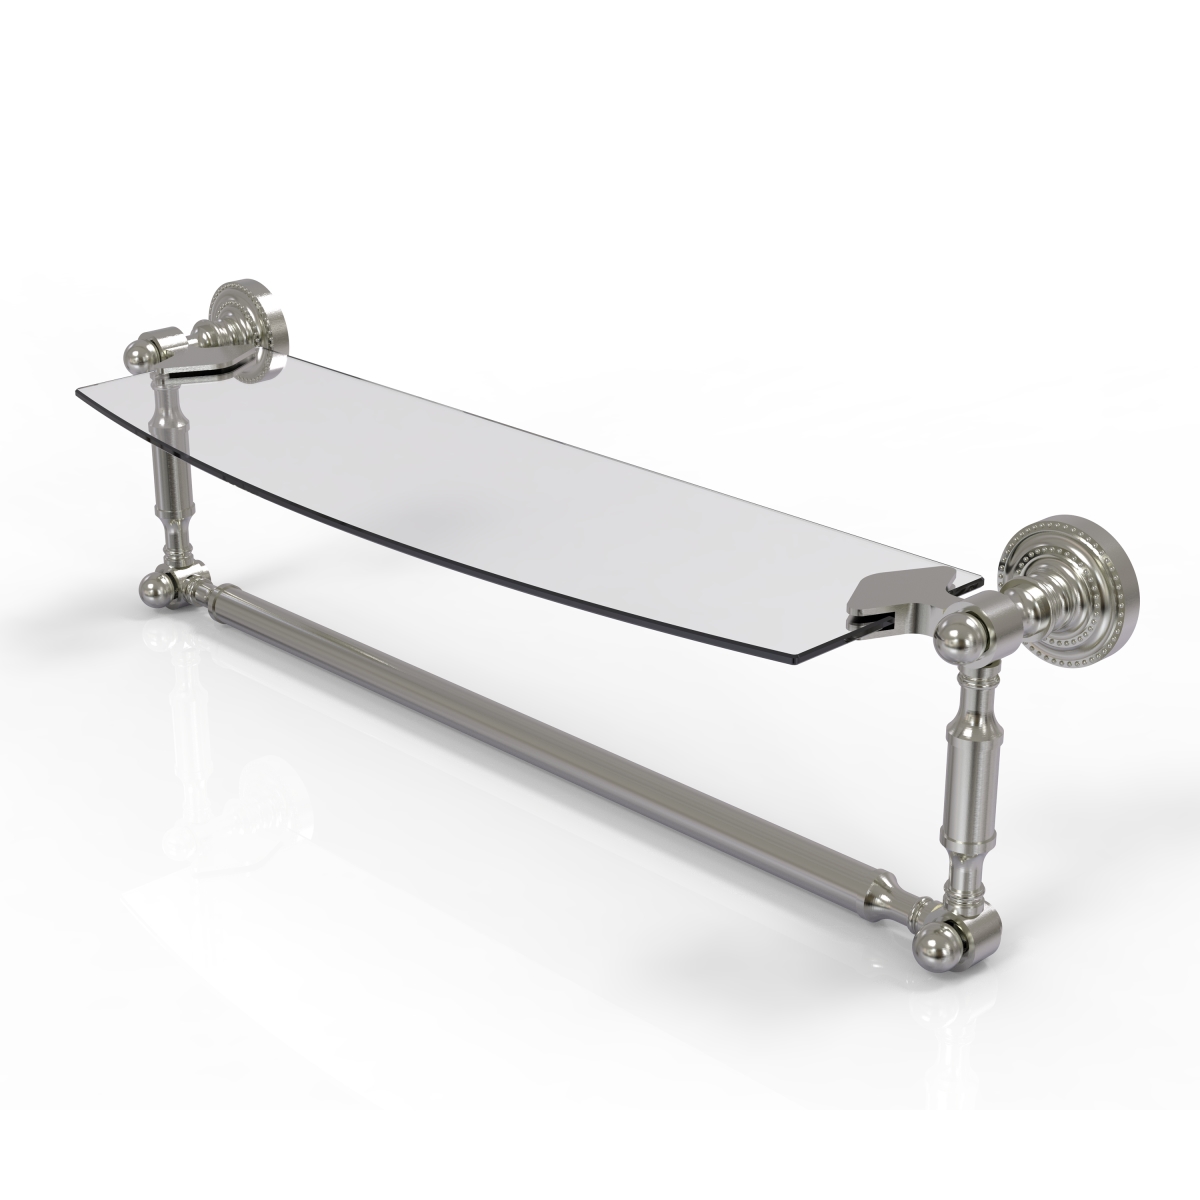 Picture of Allied Brass DT-33TB-18-SN 18 in. Dottingham Glass Vanity Shelf with Integrated Towel Bar, Satin Nickel